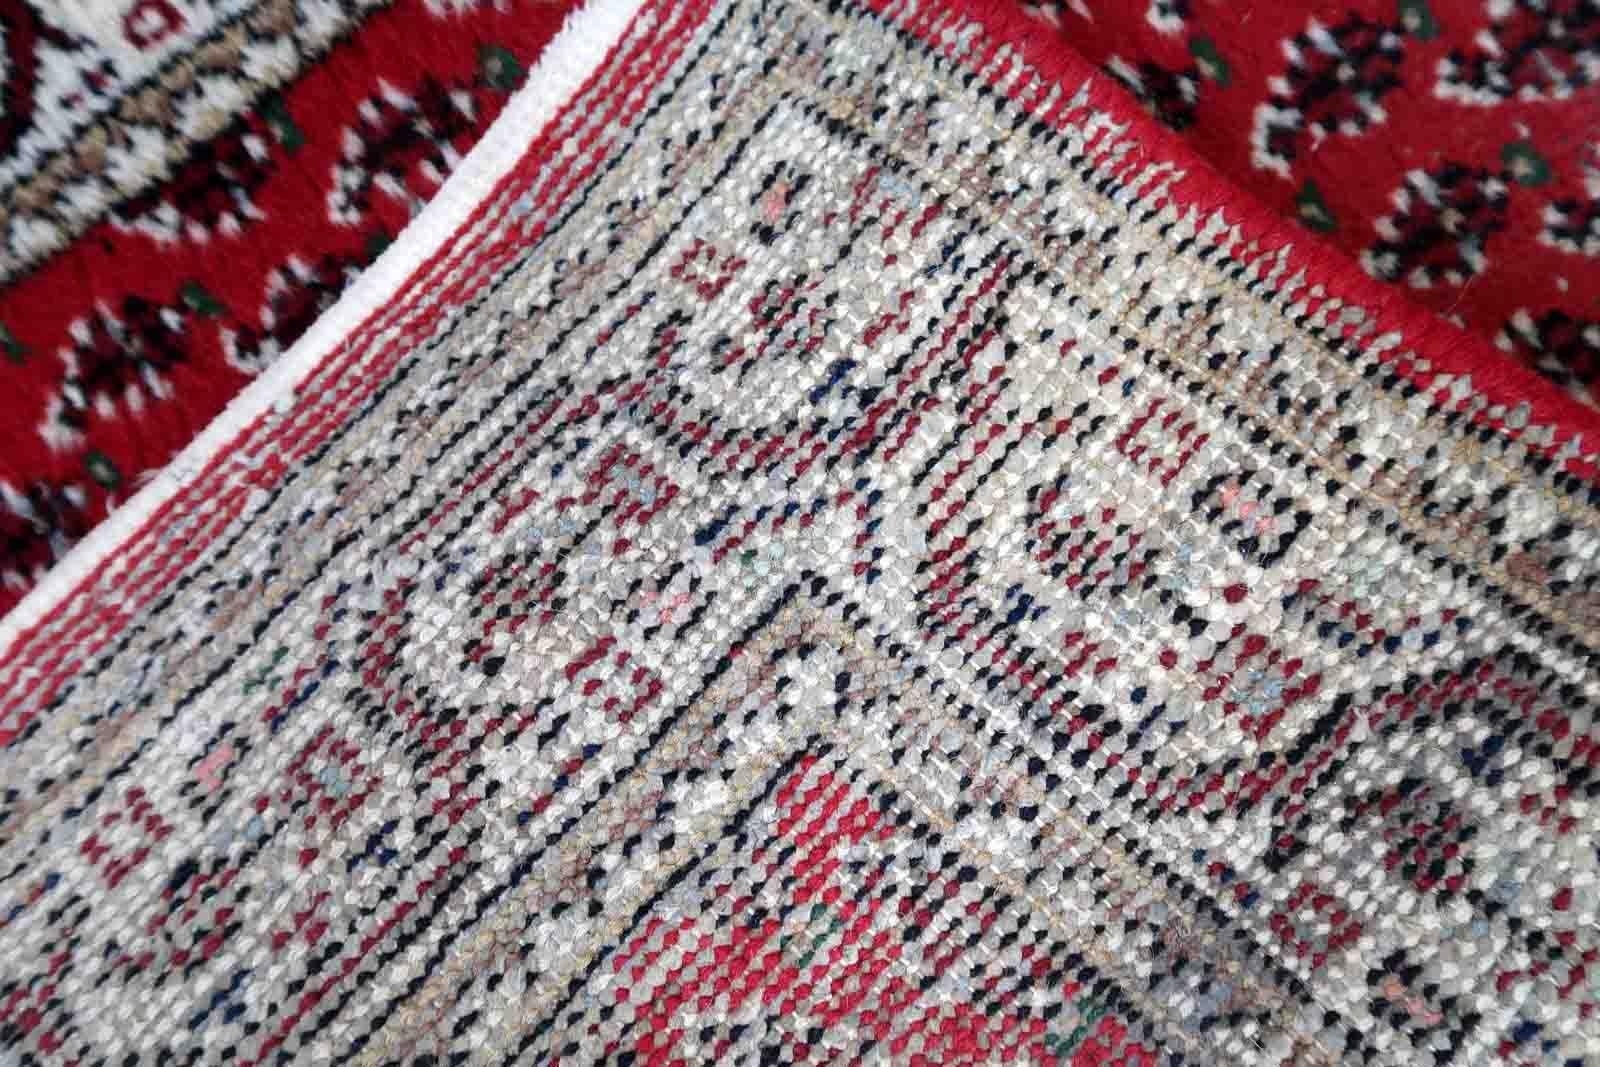 Handmade vintage Indian Seraband rug in red color and all-over design. The rug has been made in the end of 20th century. It is in original condition, has some low pile.

-condition: original, some low pile,

-circa: 1970s,

-size: 3' x 5.1'